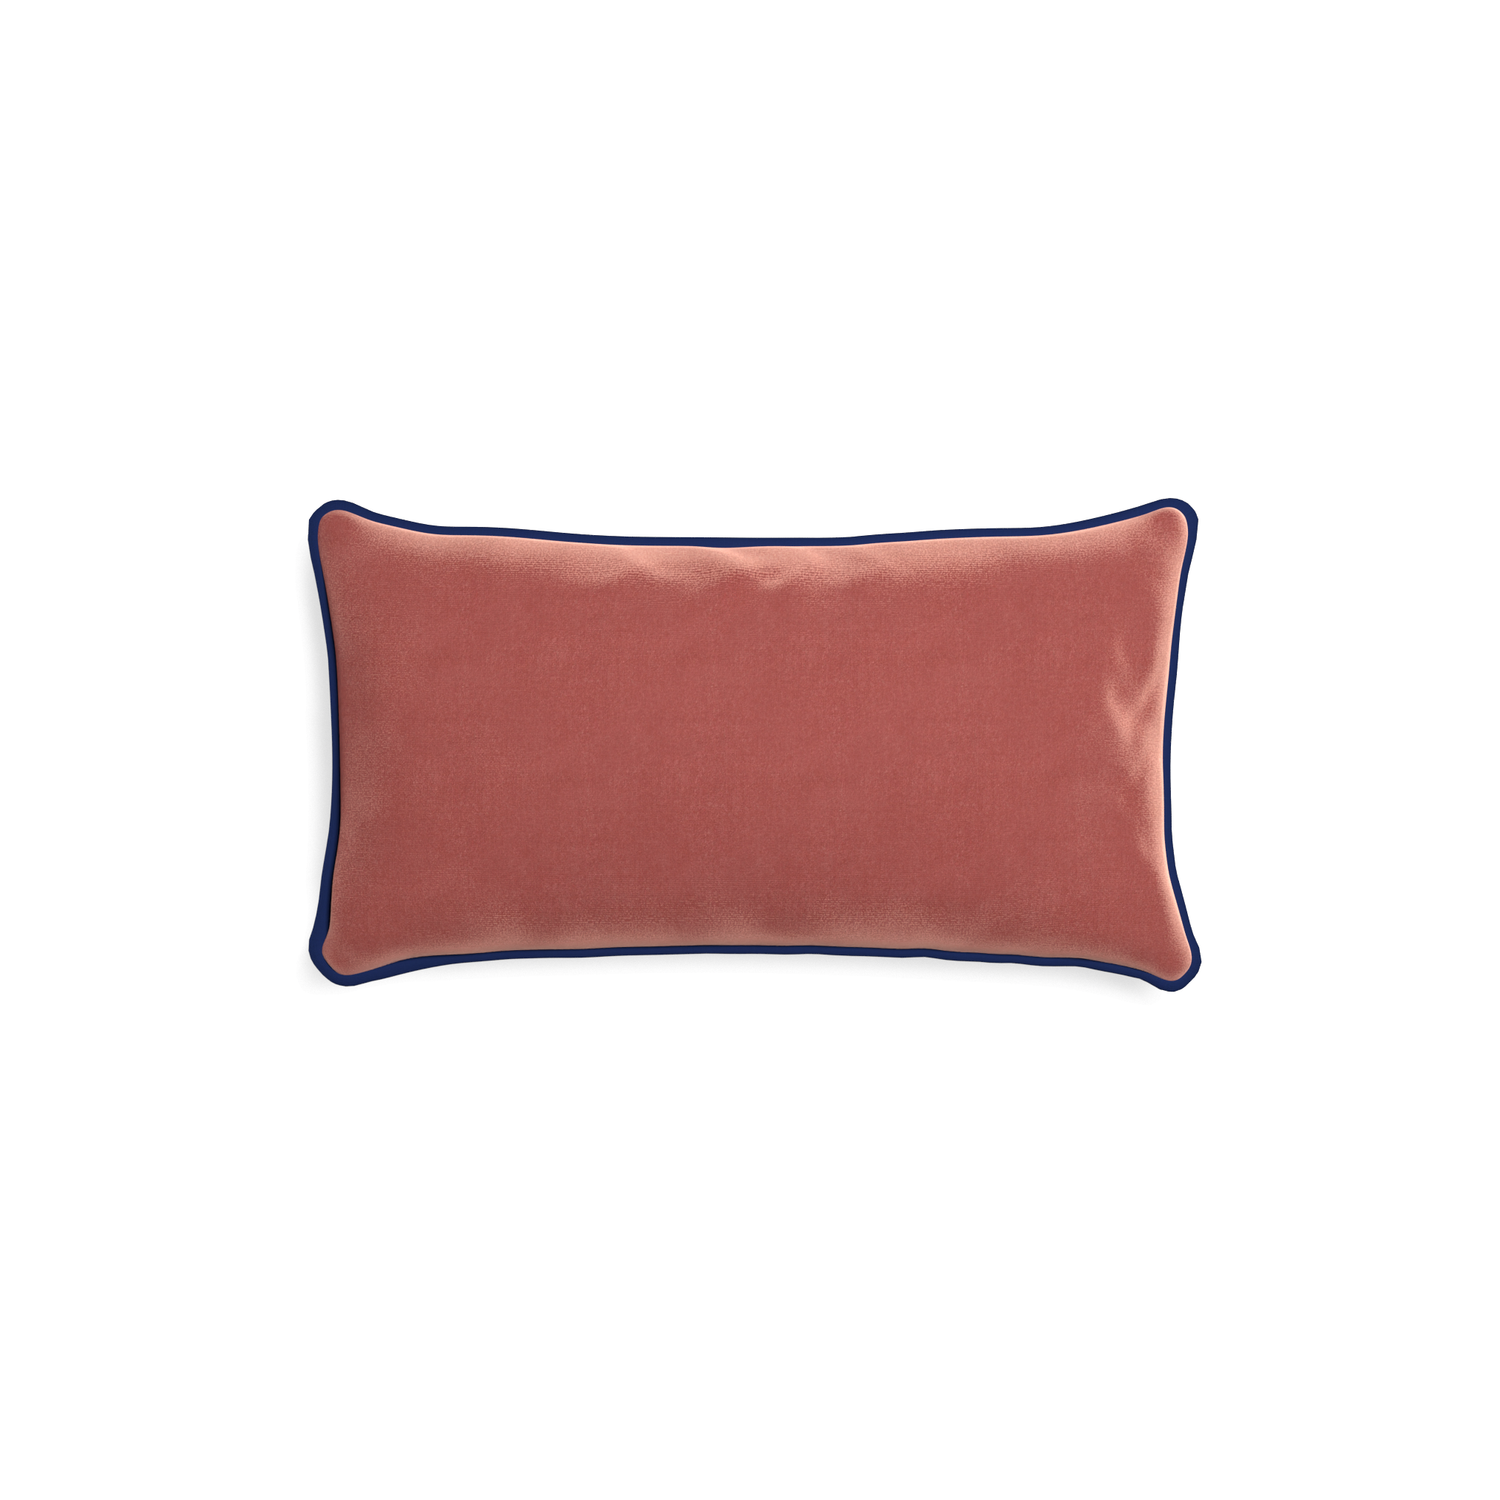 rectangle coral velvet pillow with navy blue piping